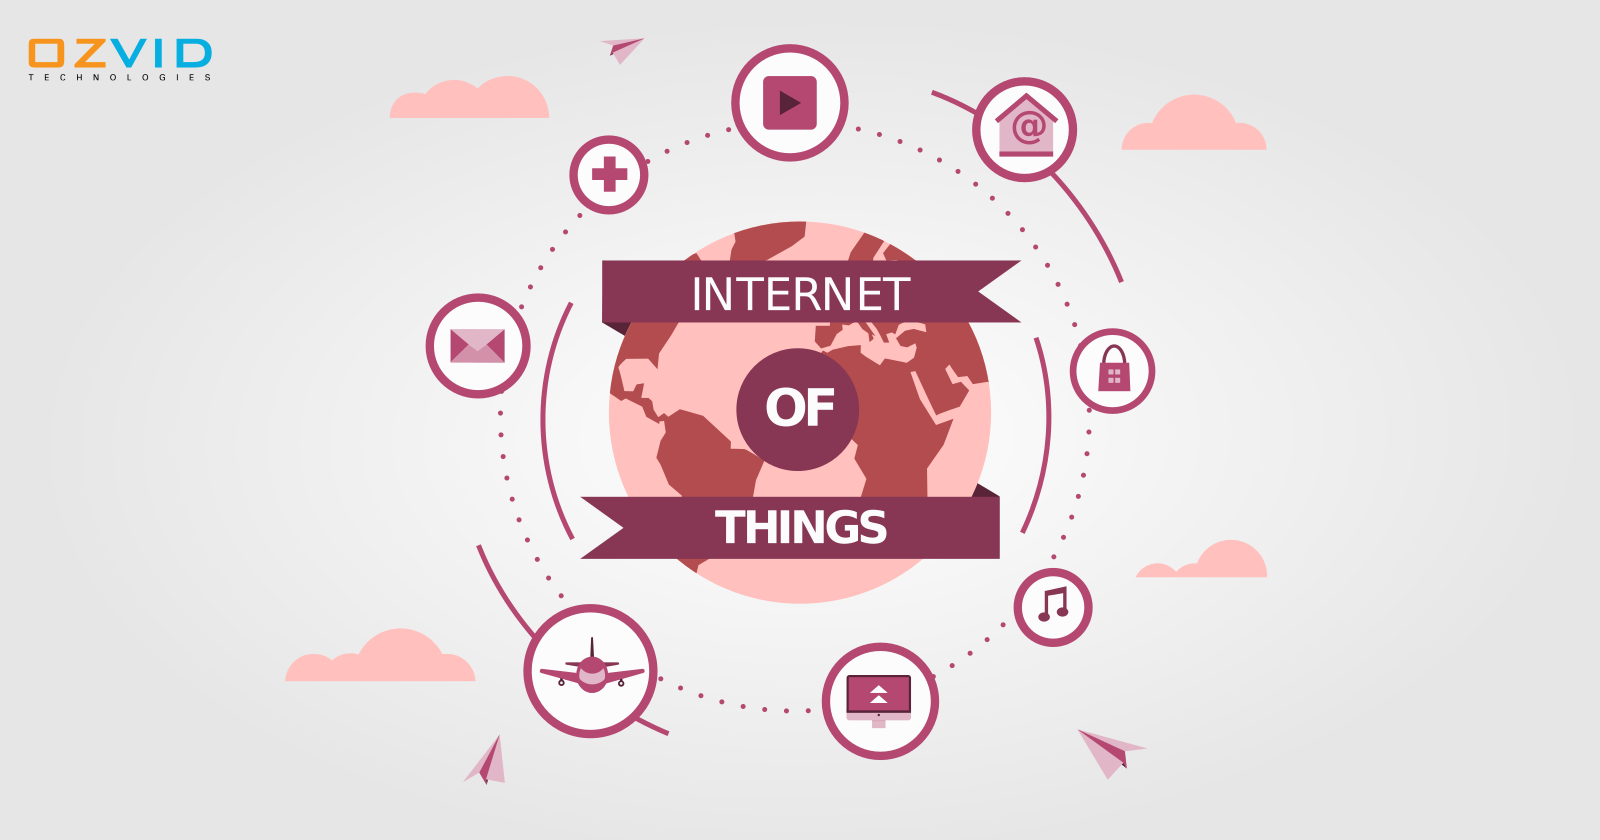 Latest Technology Trends in IoT industry!